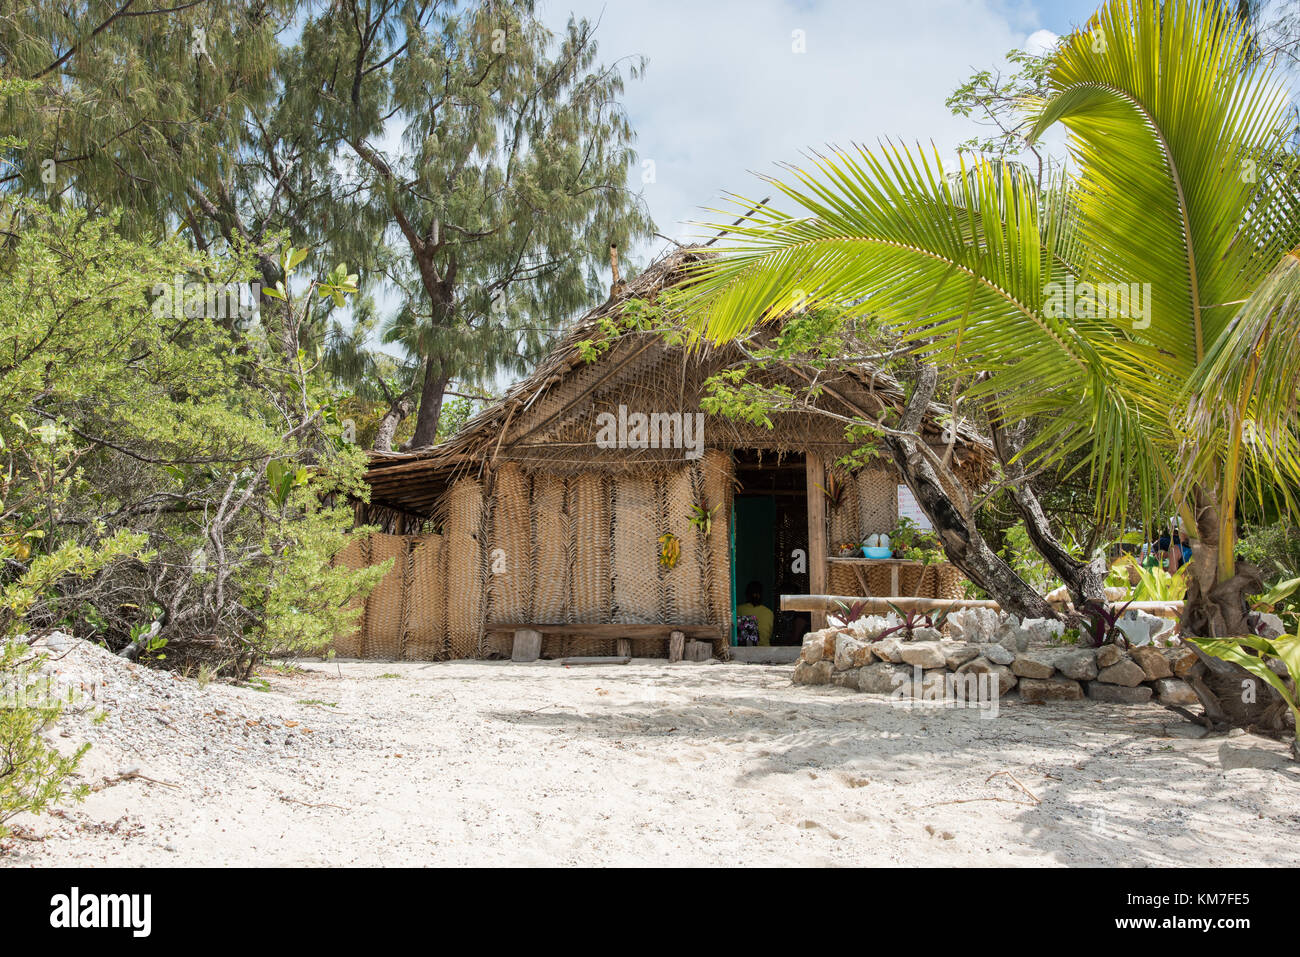 Mystery Island, Vanuatu-December 2,2016: Rustic architecture with thatched roof and tropical flora on Mystery Island, Vanuatu Stock Photo